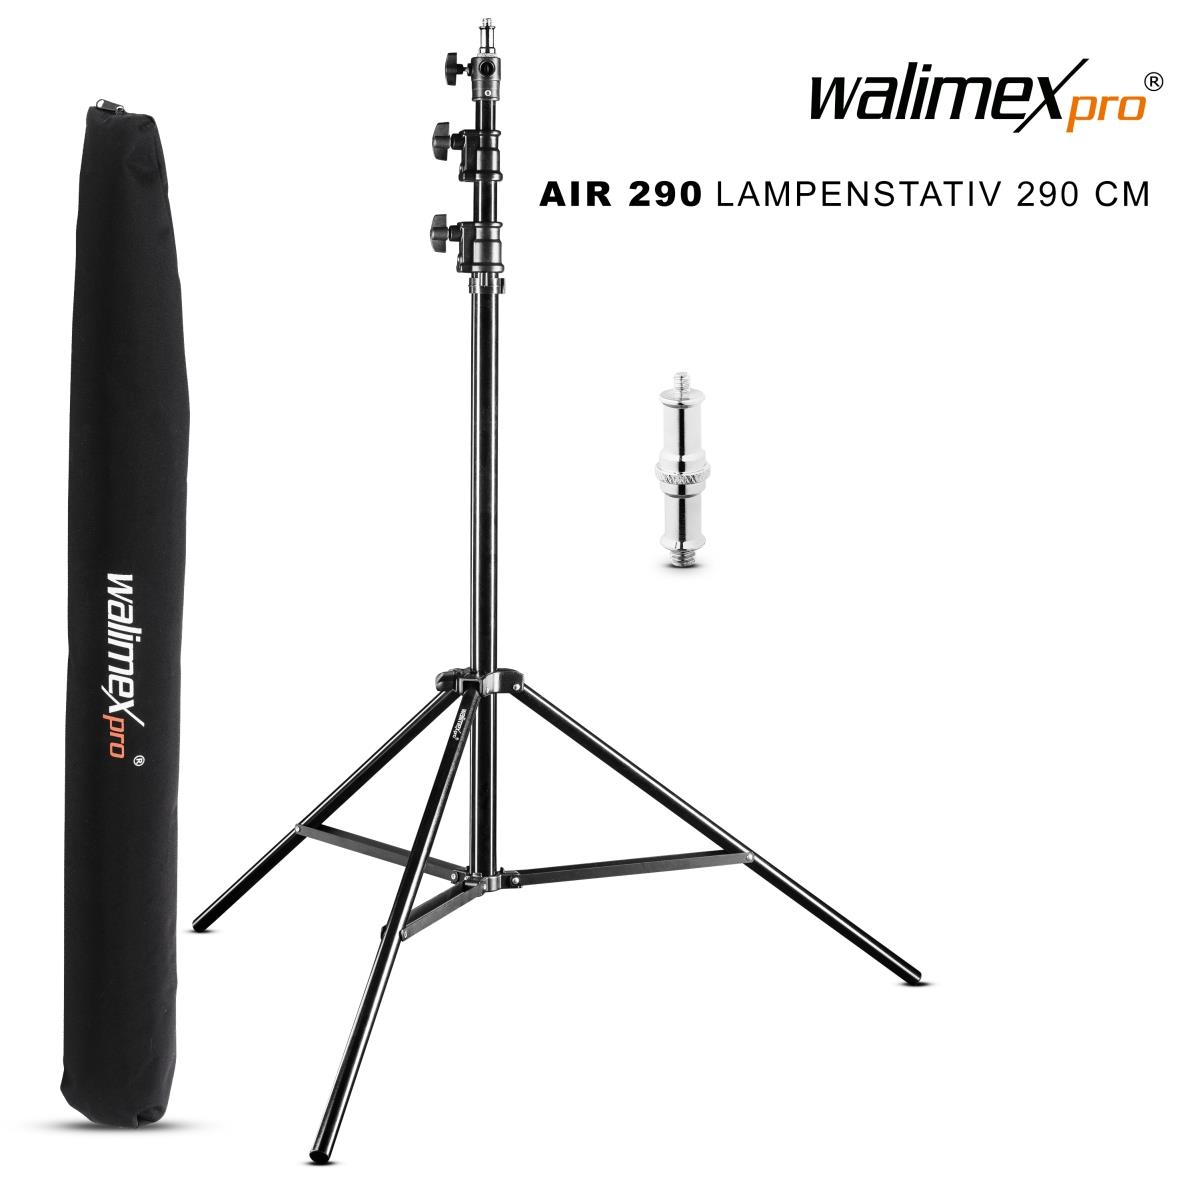 Walimex pro AIR 290 Deluxe Lampenstativ 290 cm